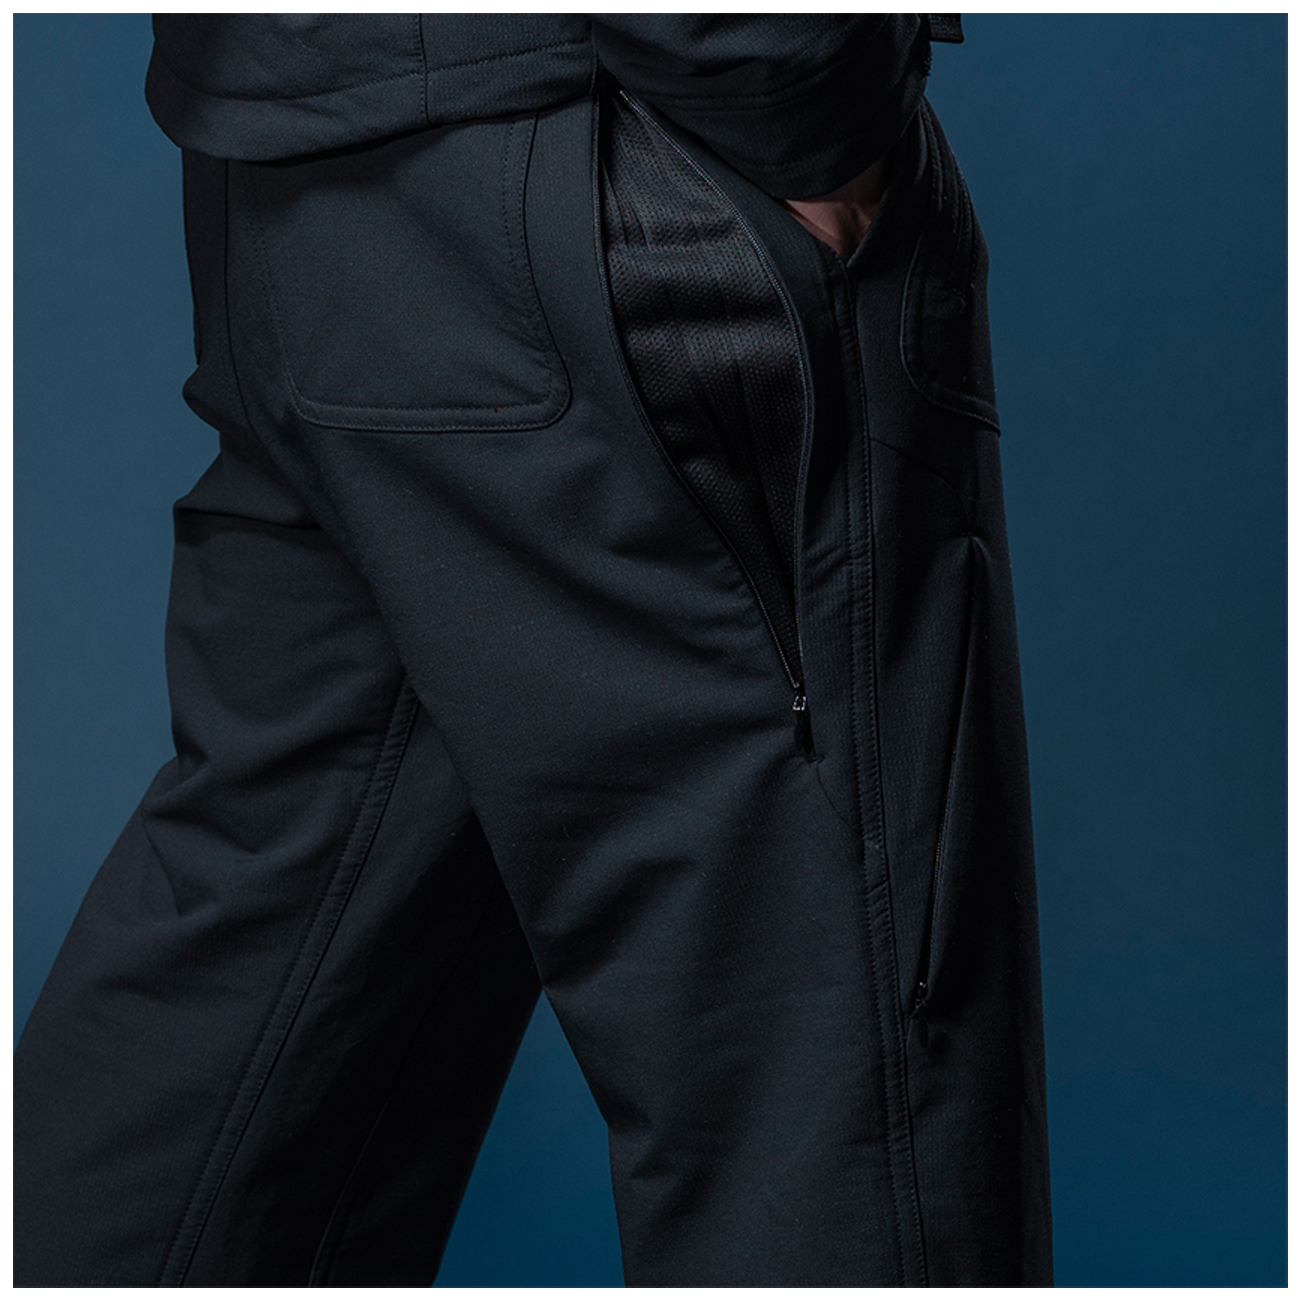 CAYL Thermo Hiking Pants- black